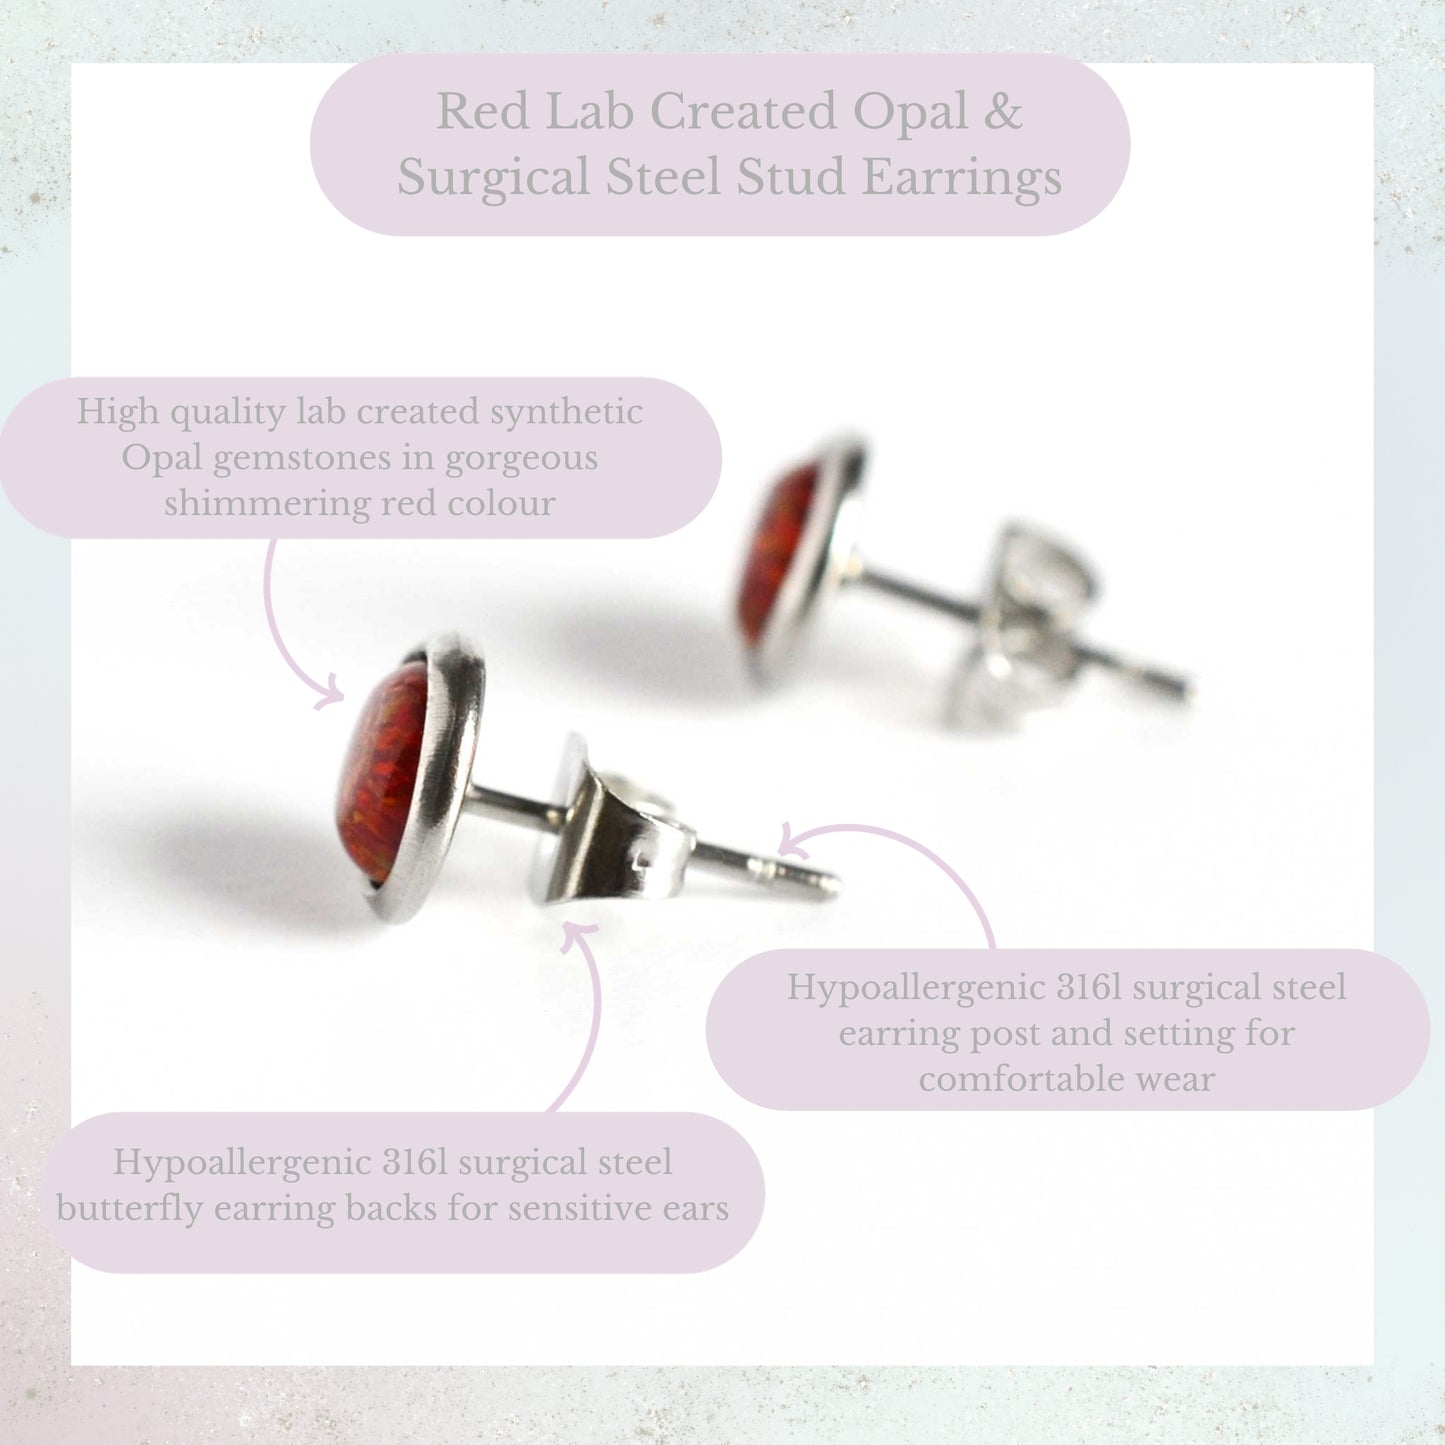 Red Lab Created Opal & Surgical Steel Stud Earrings Product Information Graphic